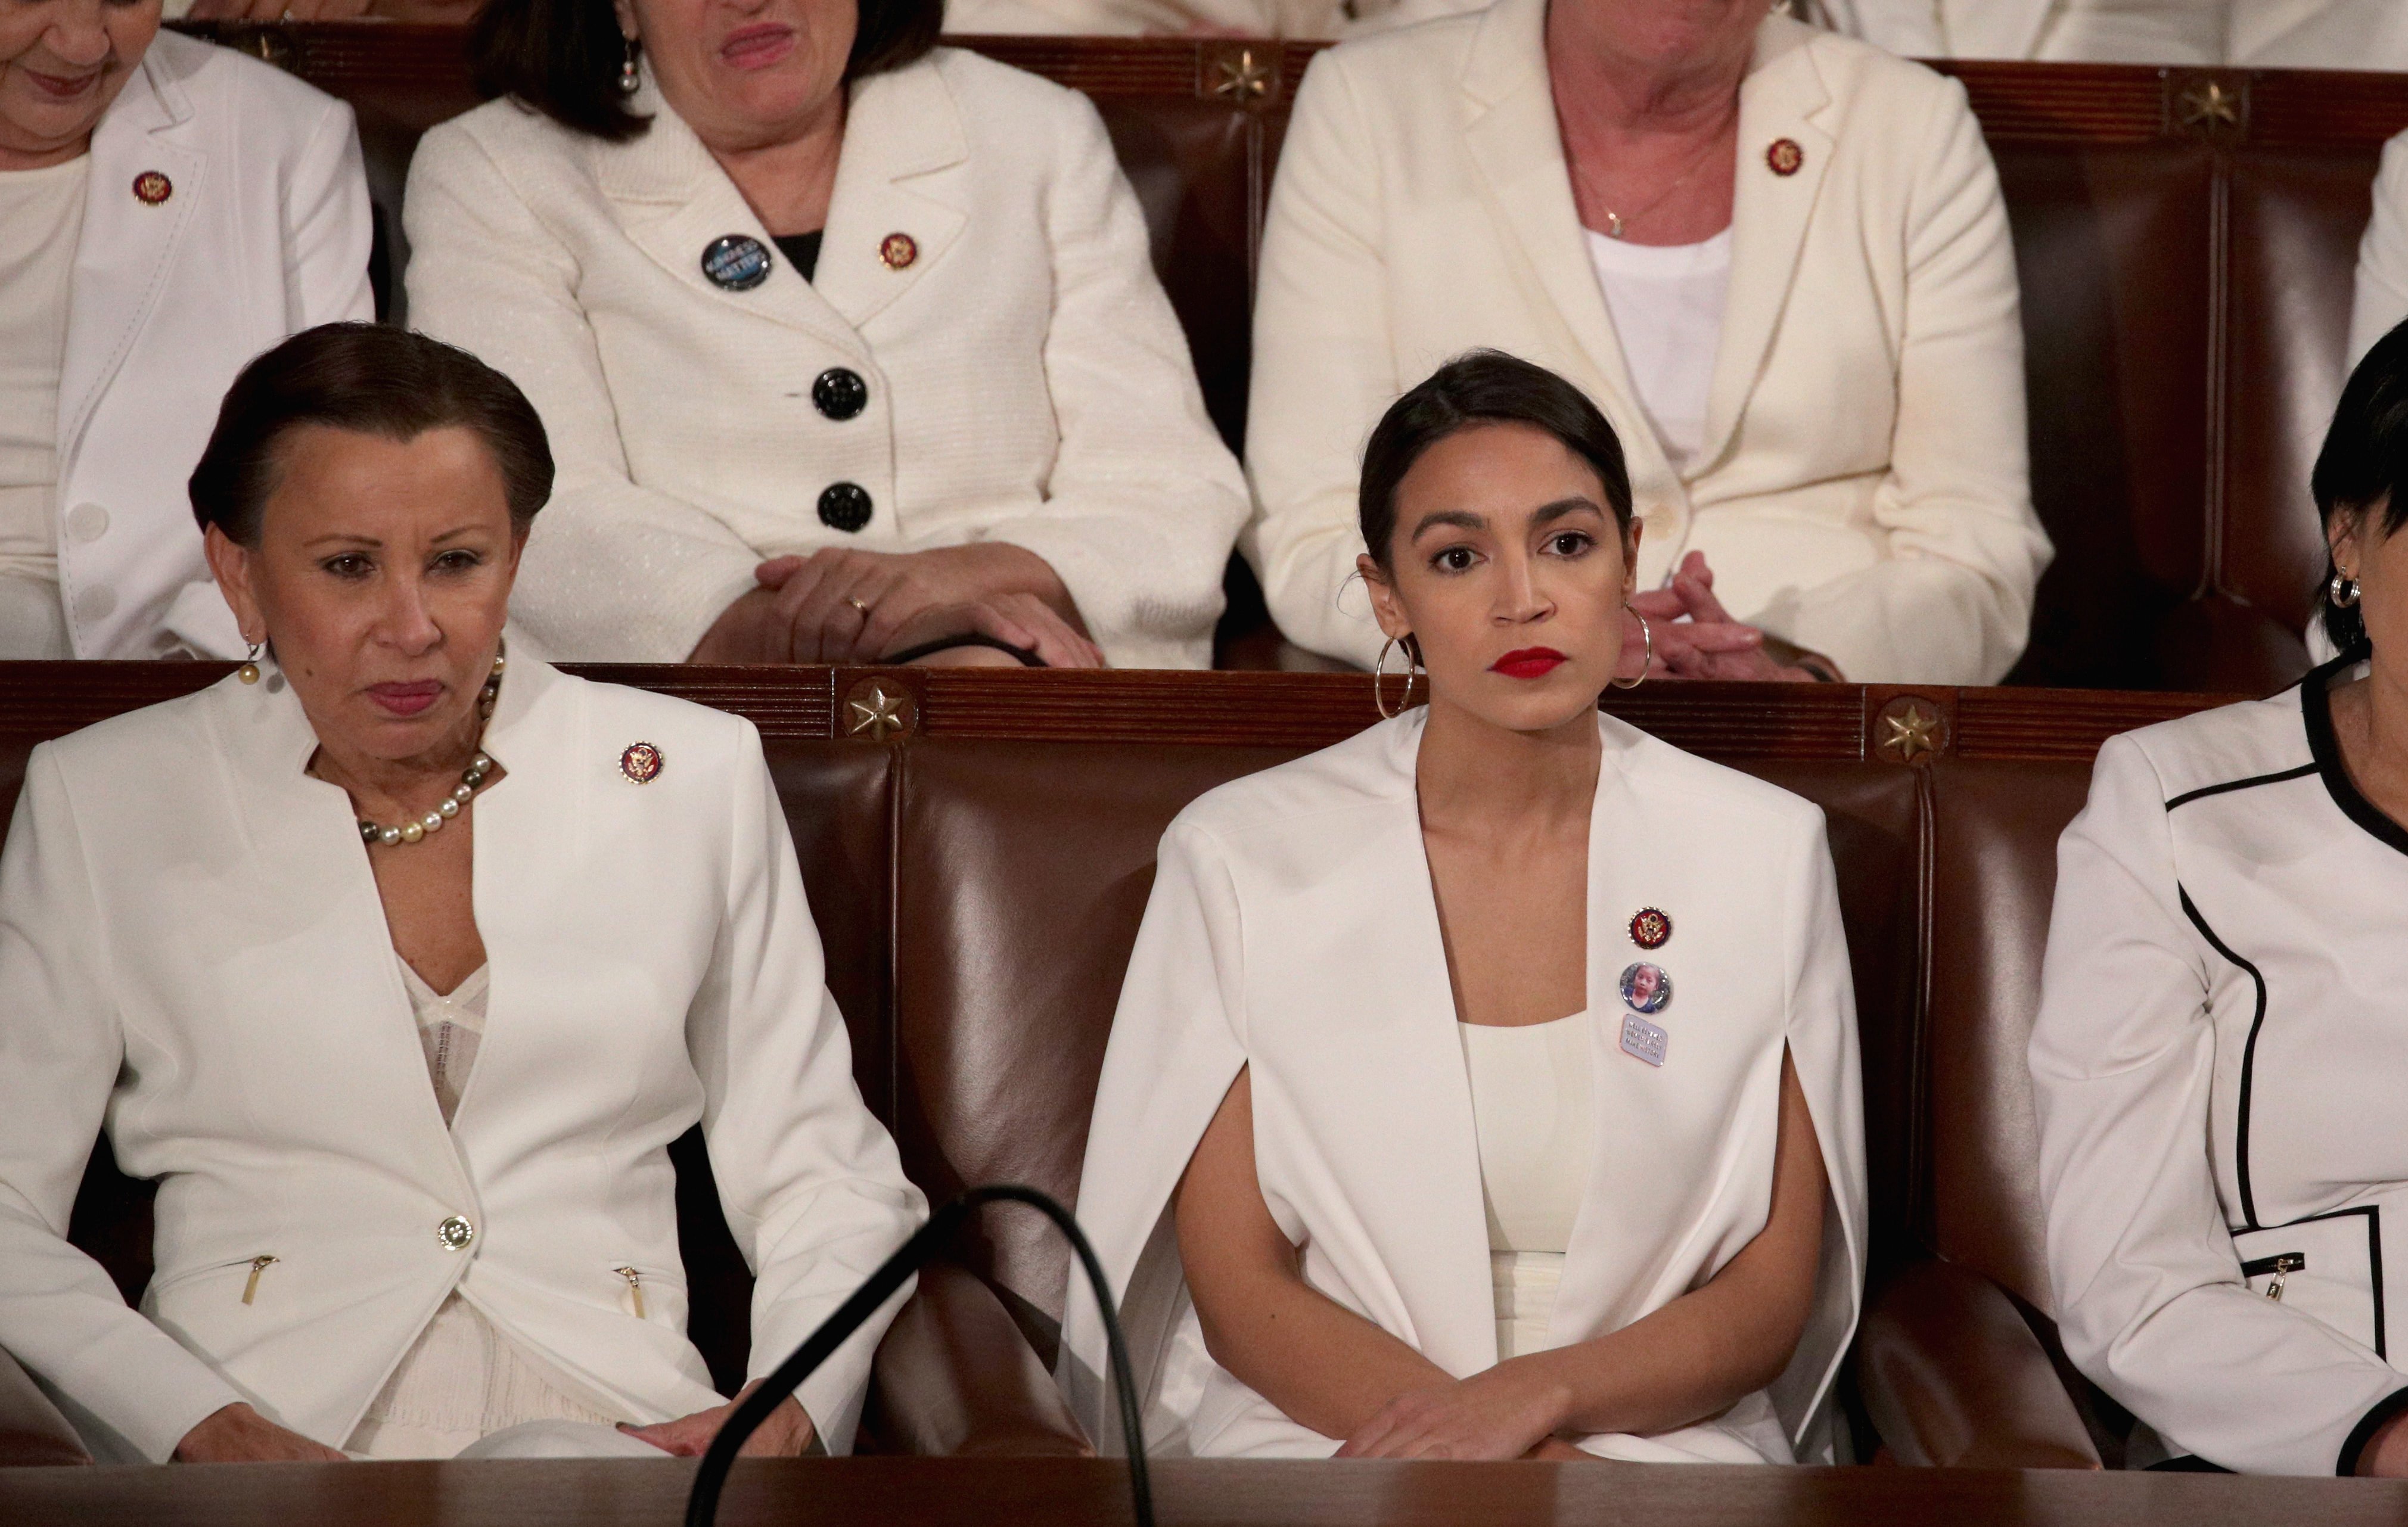 (L to R) Rep. Nydia Velazquez and Rep. Alexandria Ocasio-Cortez watch President Donald Trump's State of the Union address in the chamber of the U.S. House of Representatives at the U.S. Capitol Building on February 5, 2019 in Washington, DC. (Photo by Alex Wong/Getty Images)